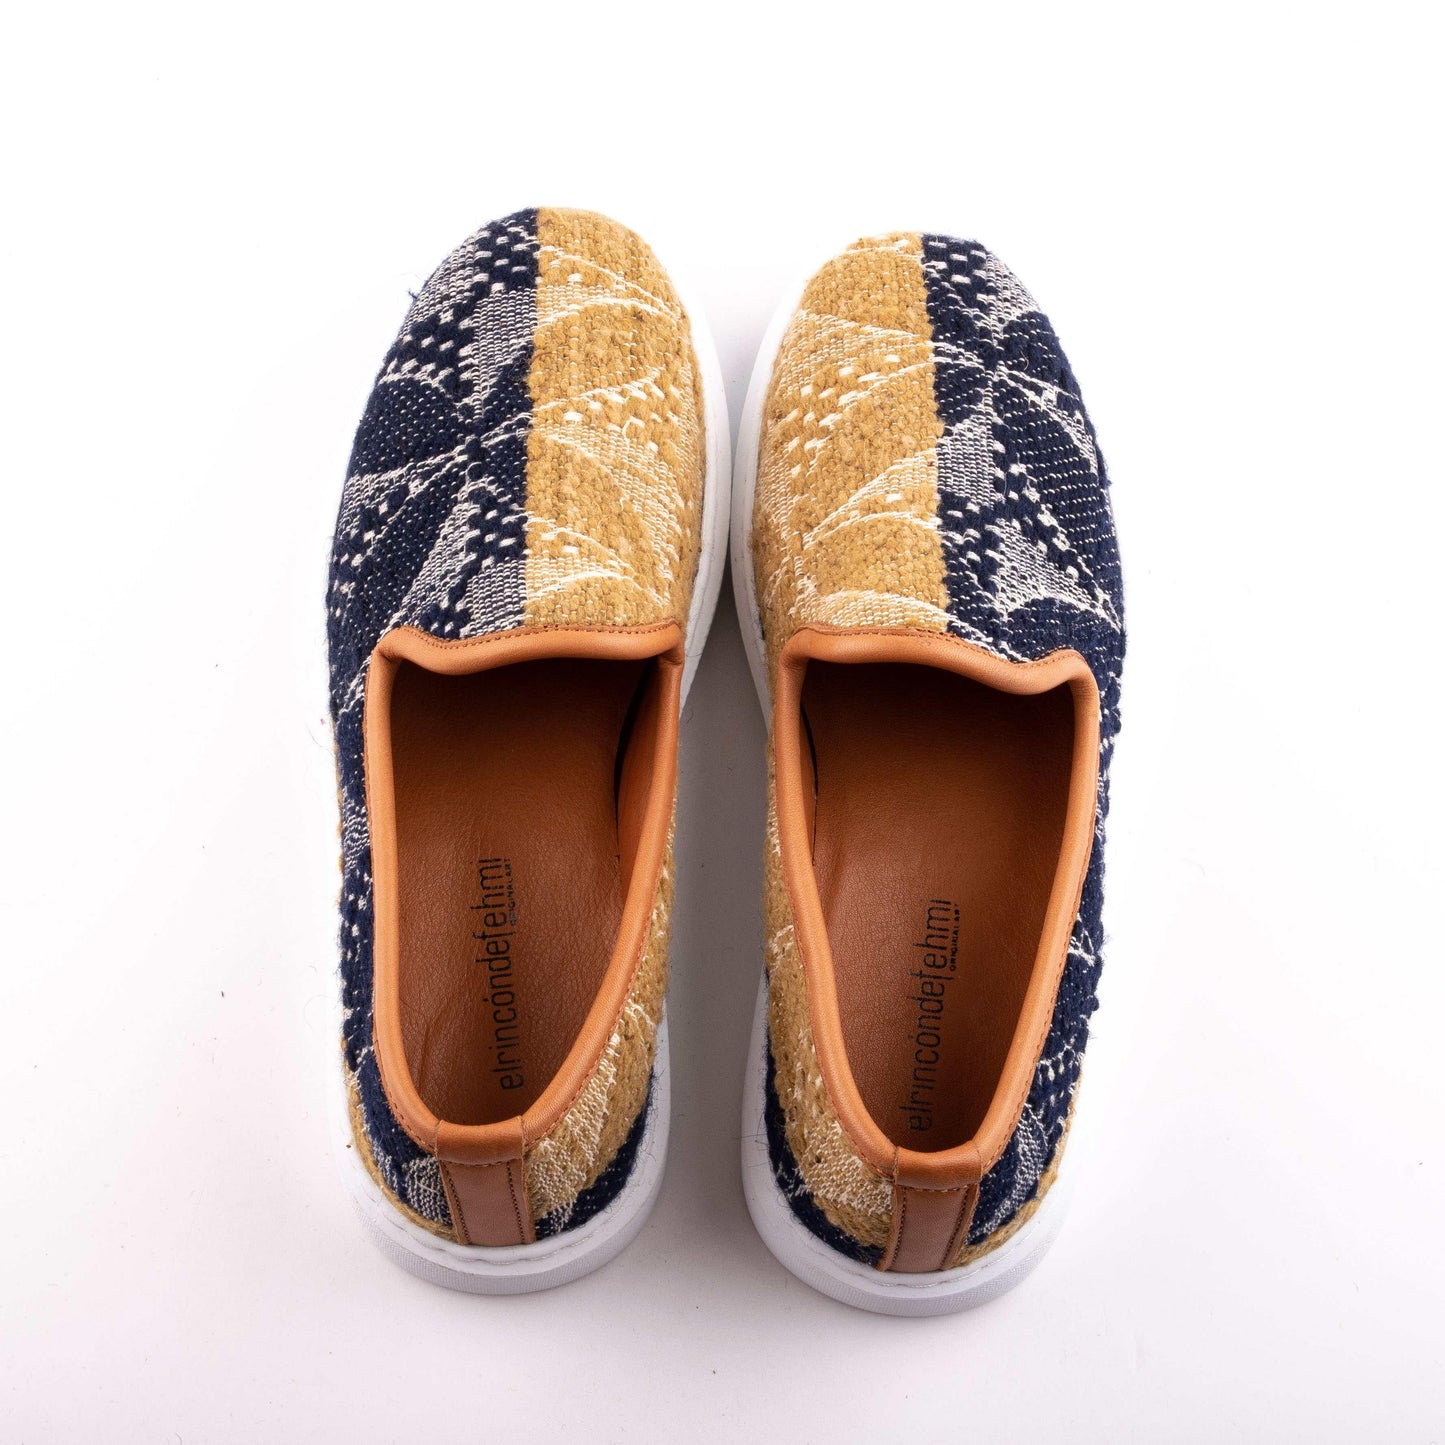 Ethnic Woman Slip-On Shoes Crafted From Handmade Kilim and Real Leather Size 9.5 - Base Width: 8.5 cm - Base Length: 25.5 cm